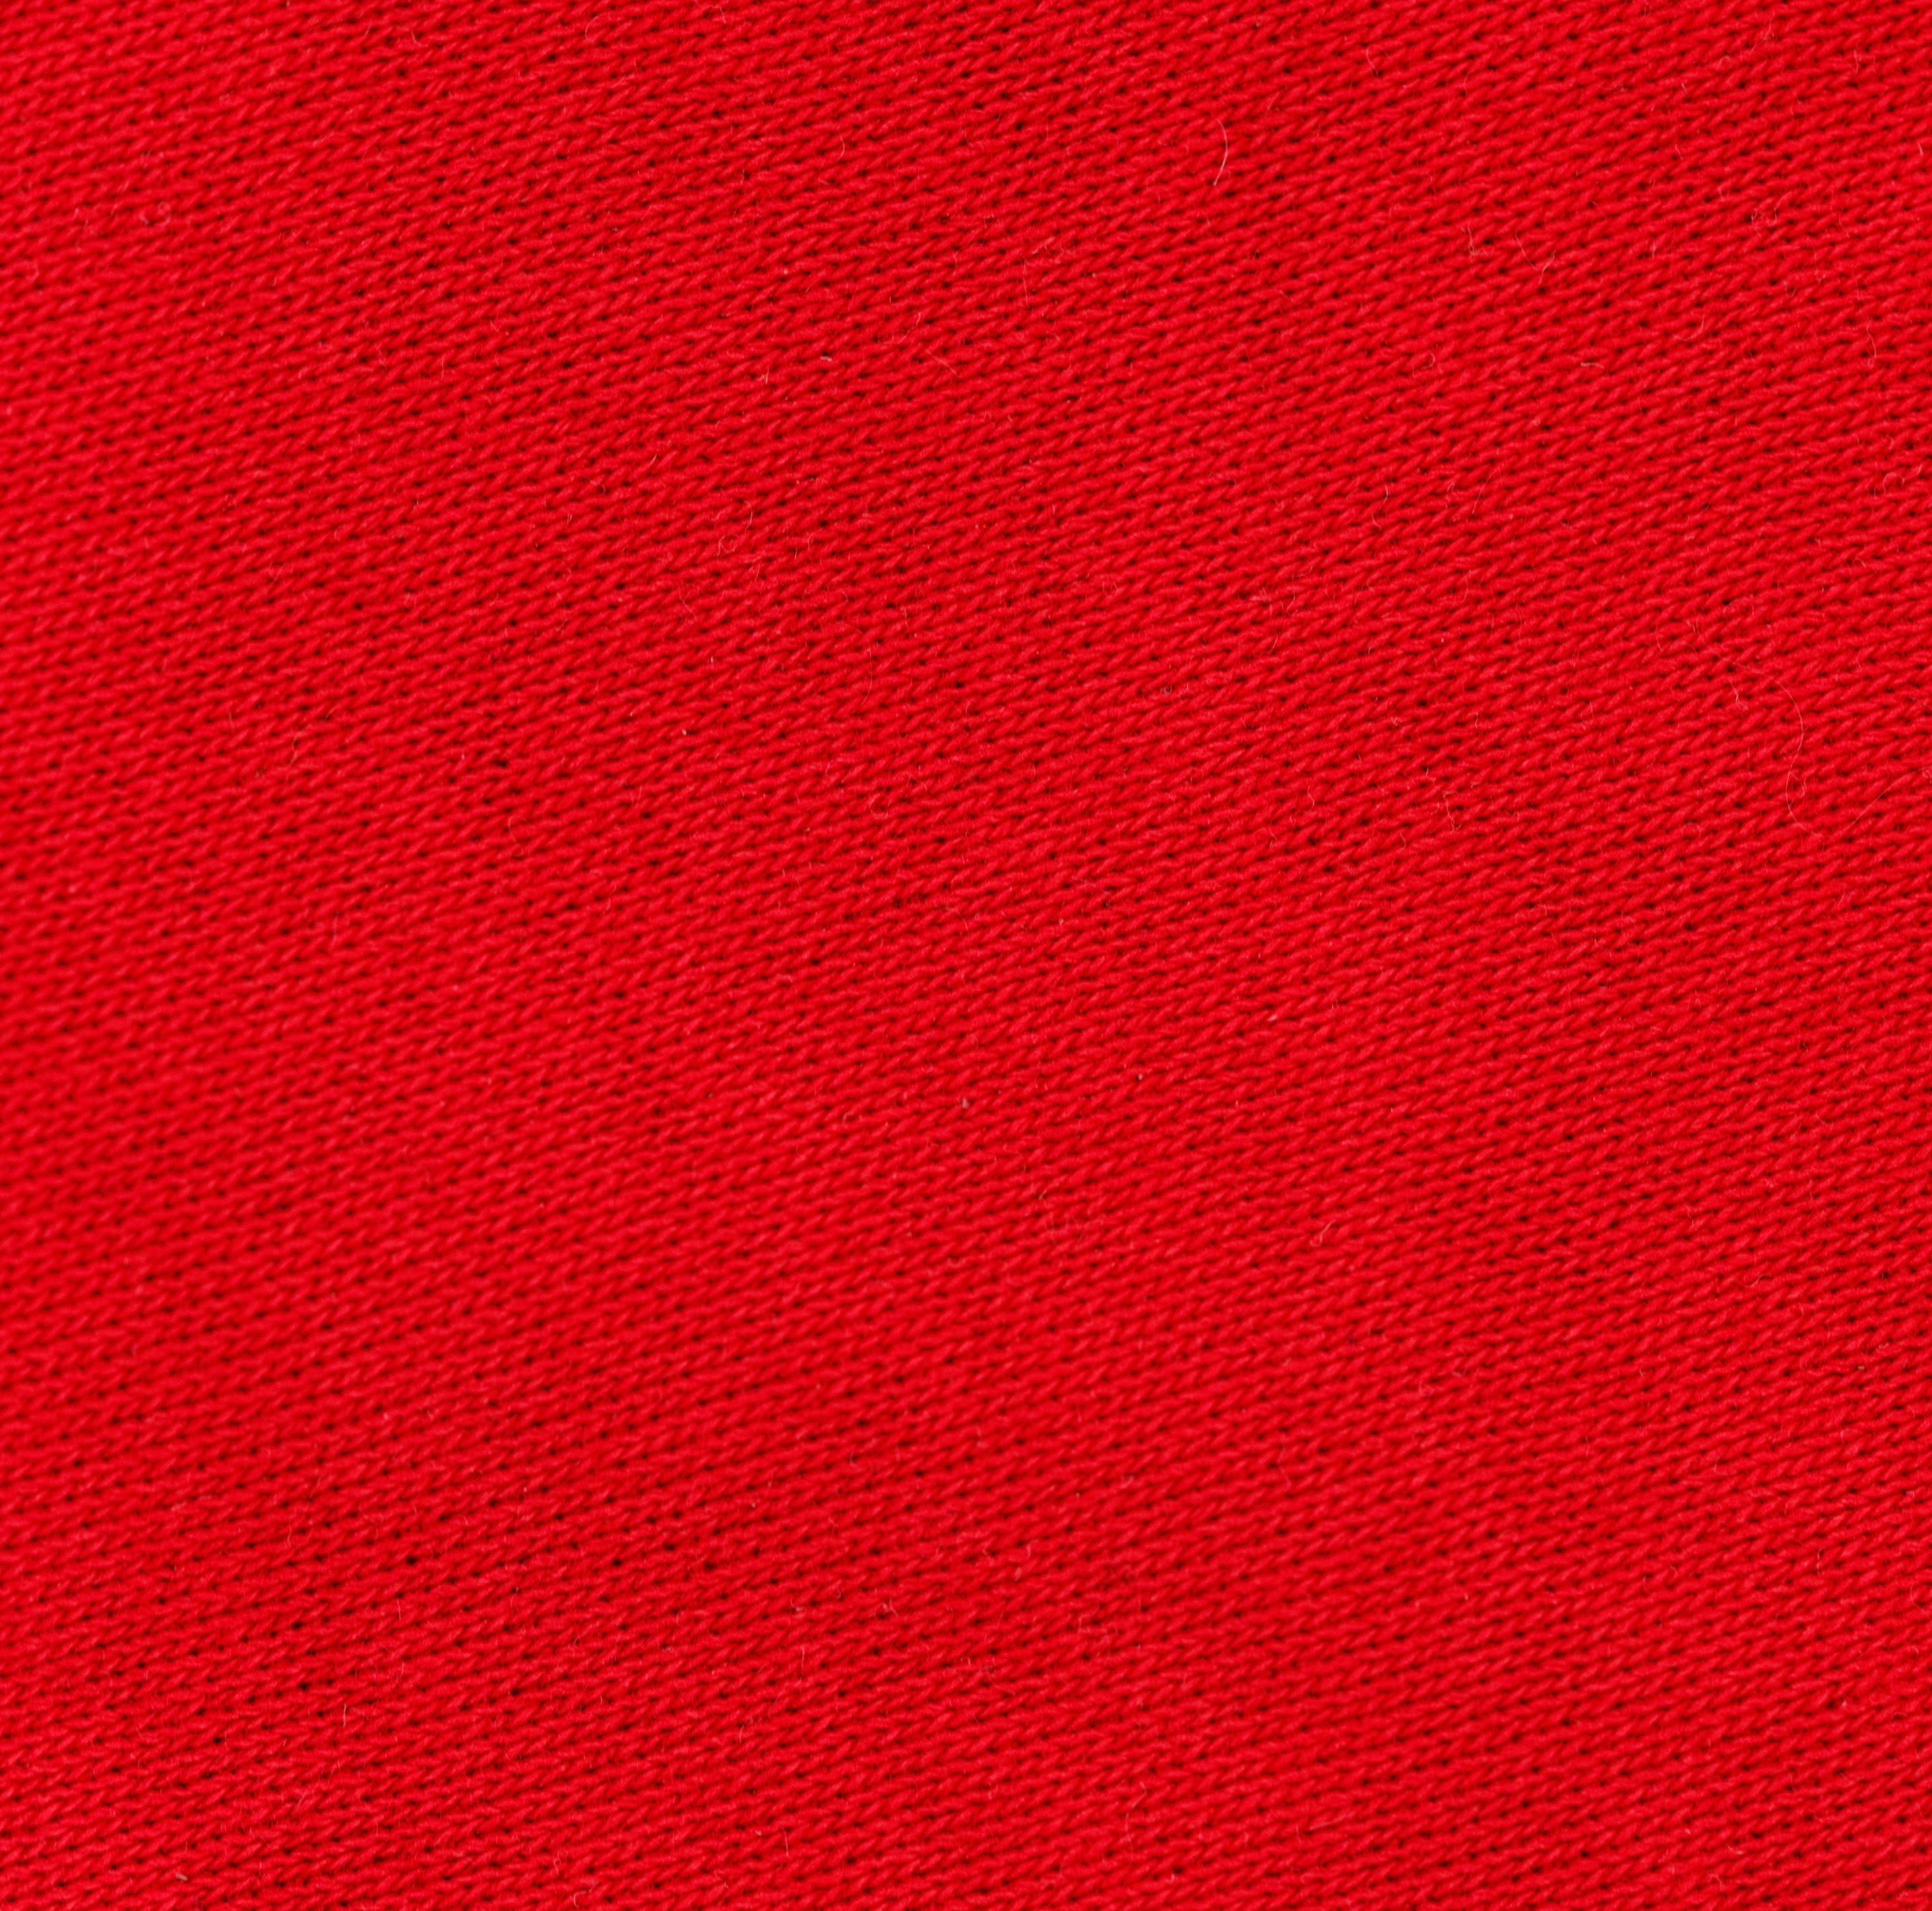 Blender Fabric, Solid Red Fabric, Cotton or Fleece, 3926 - Beautiful Quilt